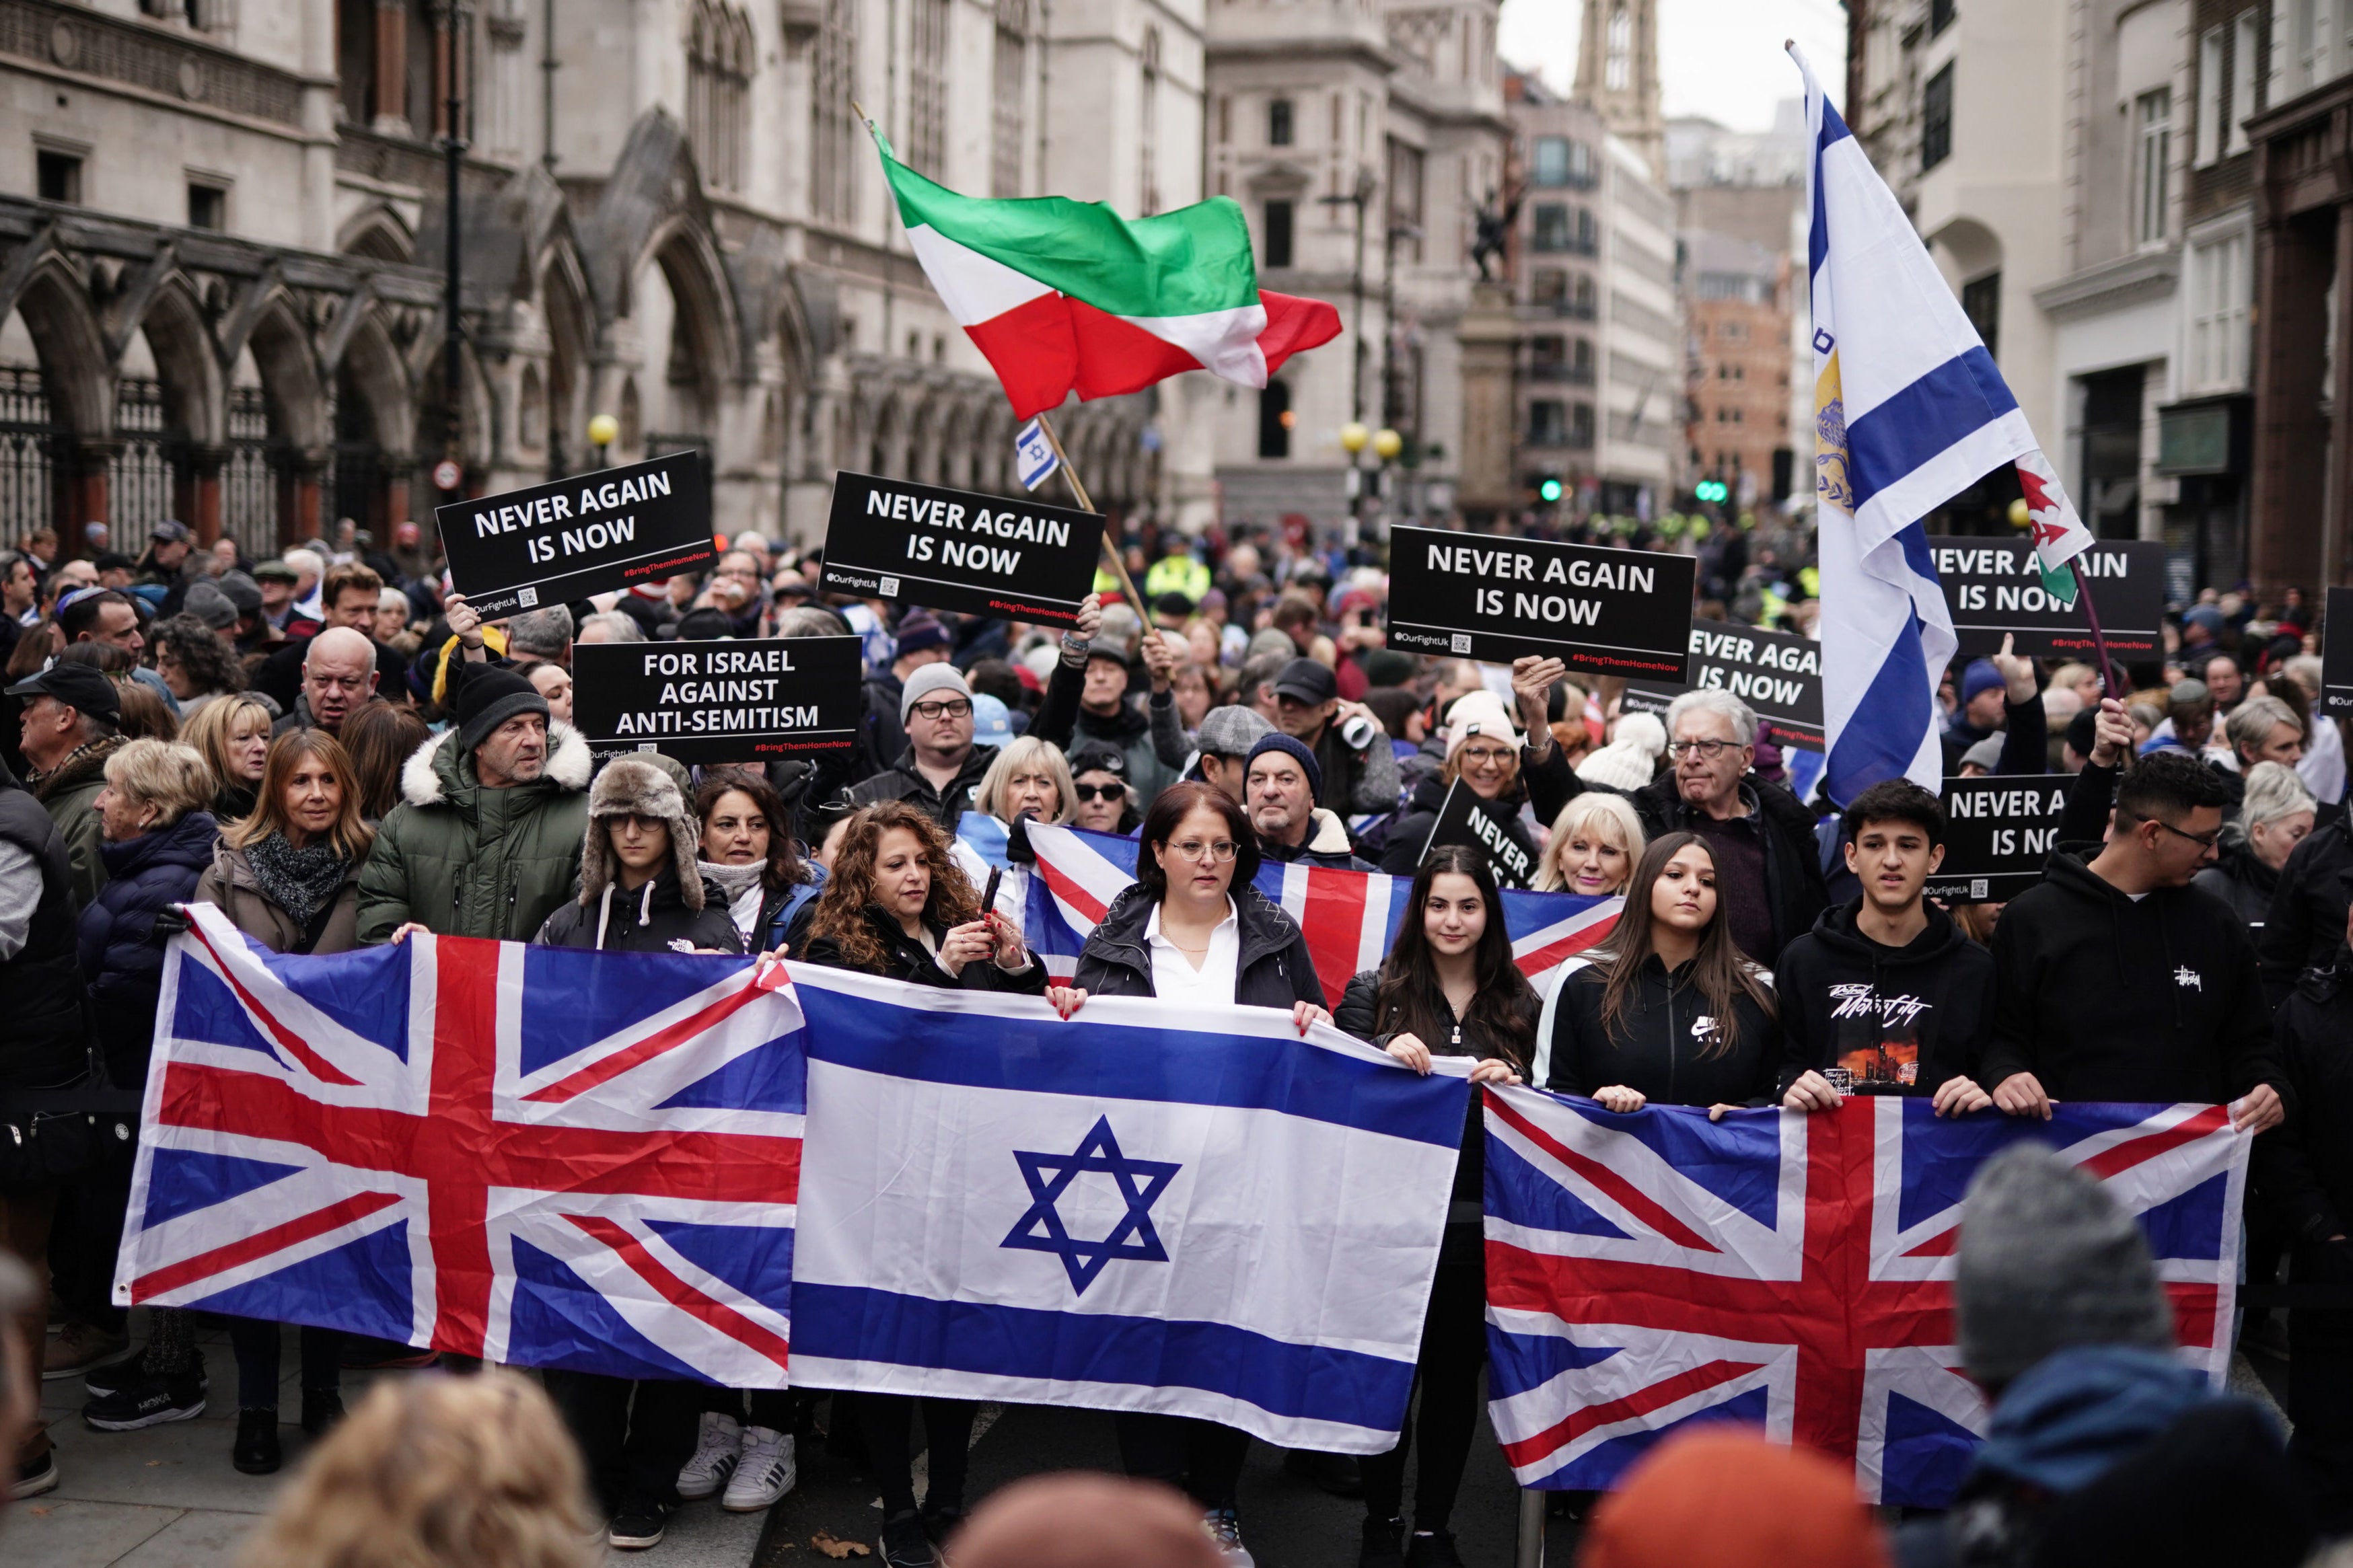 Police have expressed concern about rising incidents of antisemitism and Islamophobia. Thousands joined a march against antisemitism in London last month.